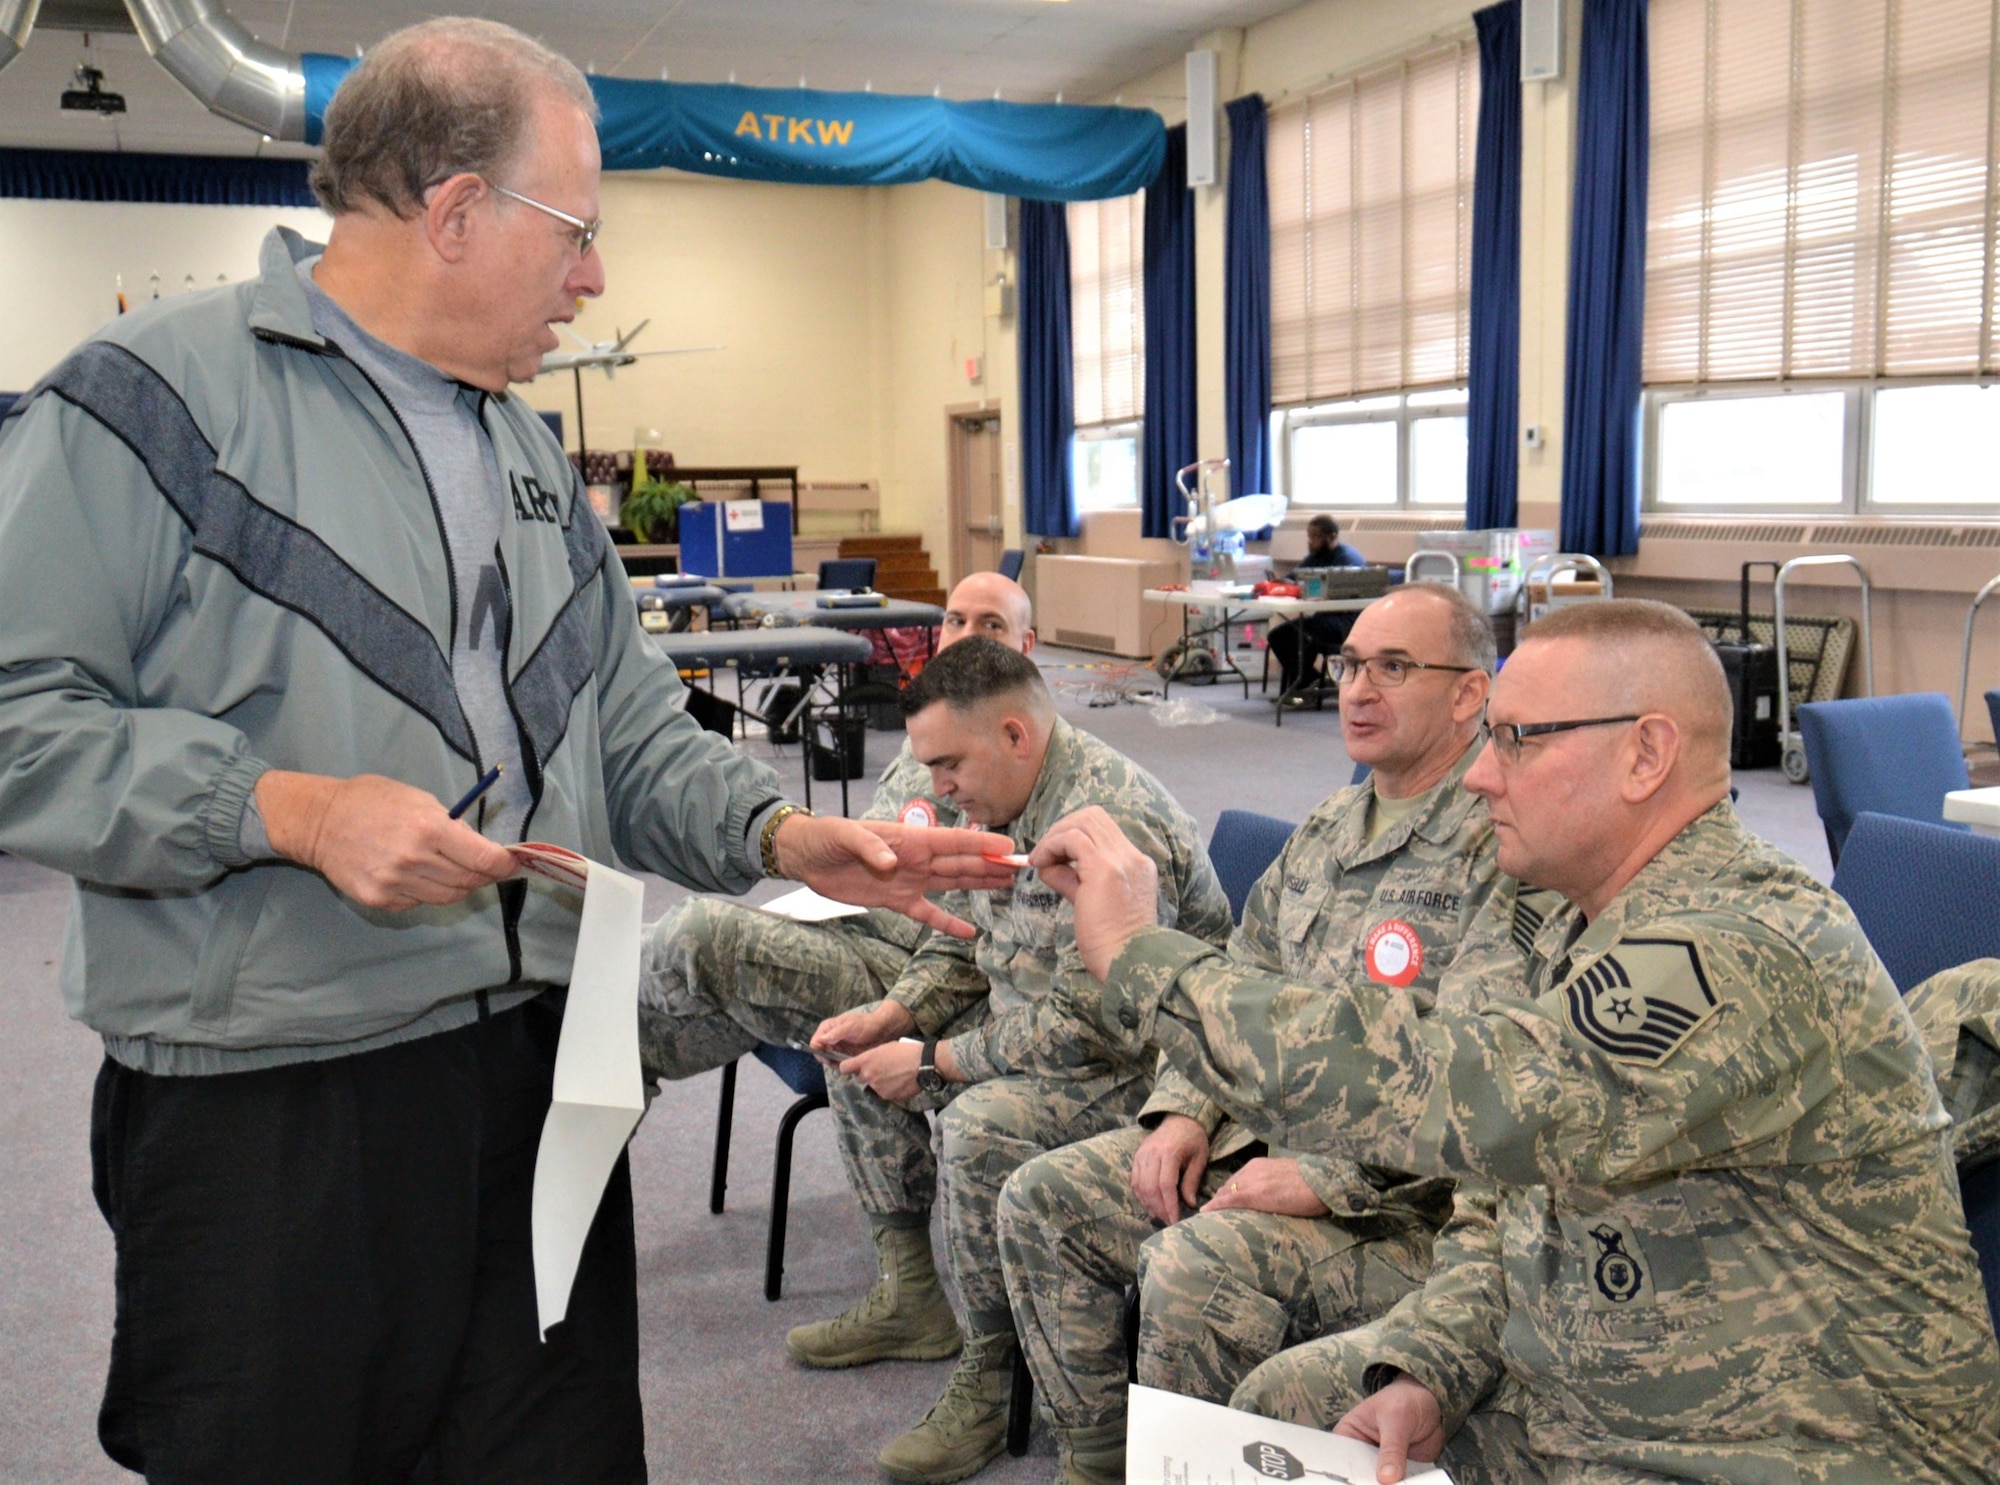 Members of the 111th Attack Wing doante their time and blood to the Red Cross Feb. 11, 2018 at Horsham Air Guard Station, Pa. Recent winter weather conditions have lead to a significant shortfall in blood donations within the local area. (U.S. Air National Guard photo by Tech. Sgt. Andria Allmond)